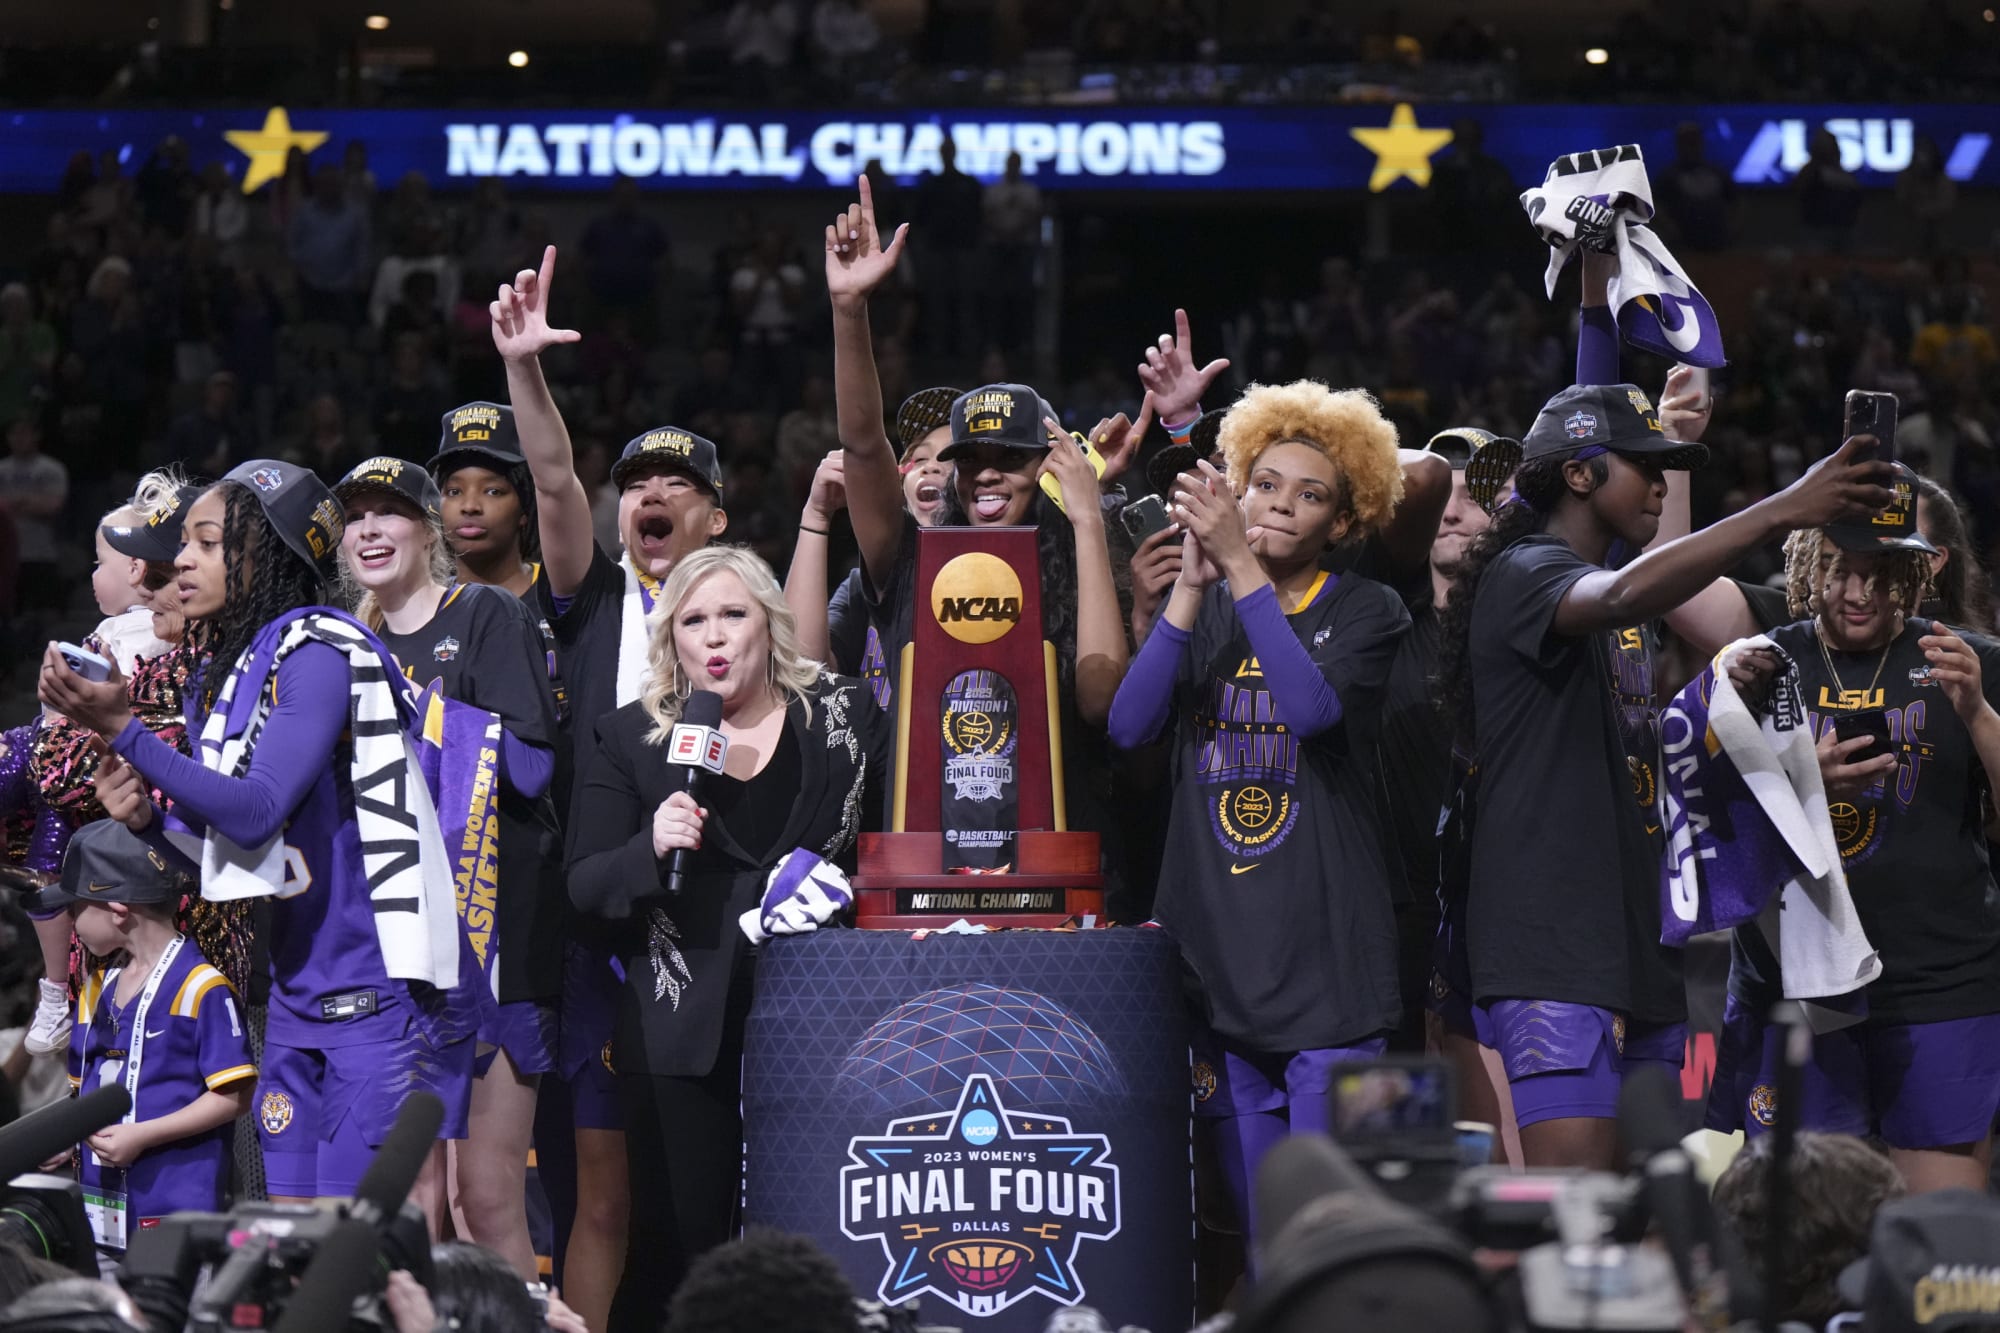 The LSU Tigers are the 2023 Women’s NCAA National Champions